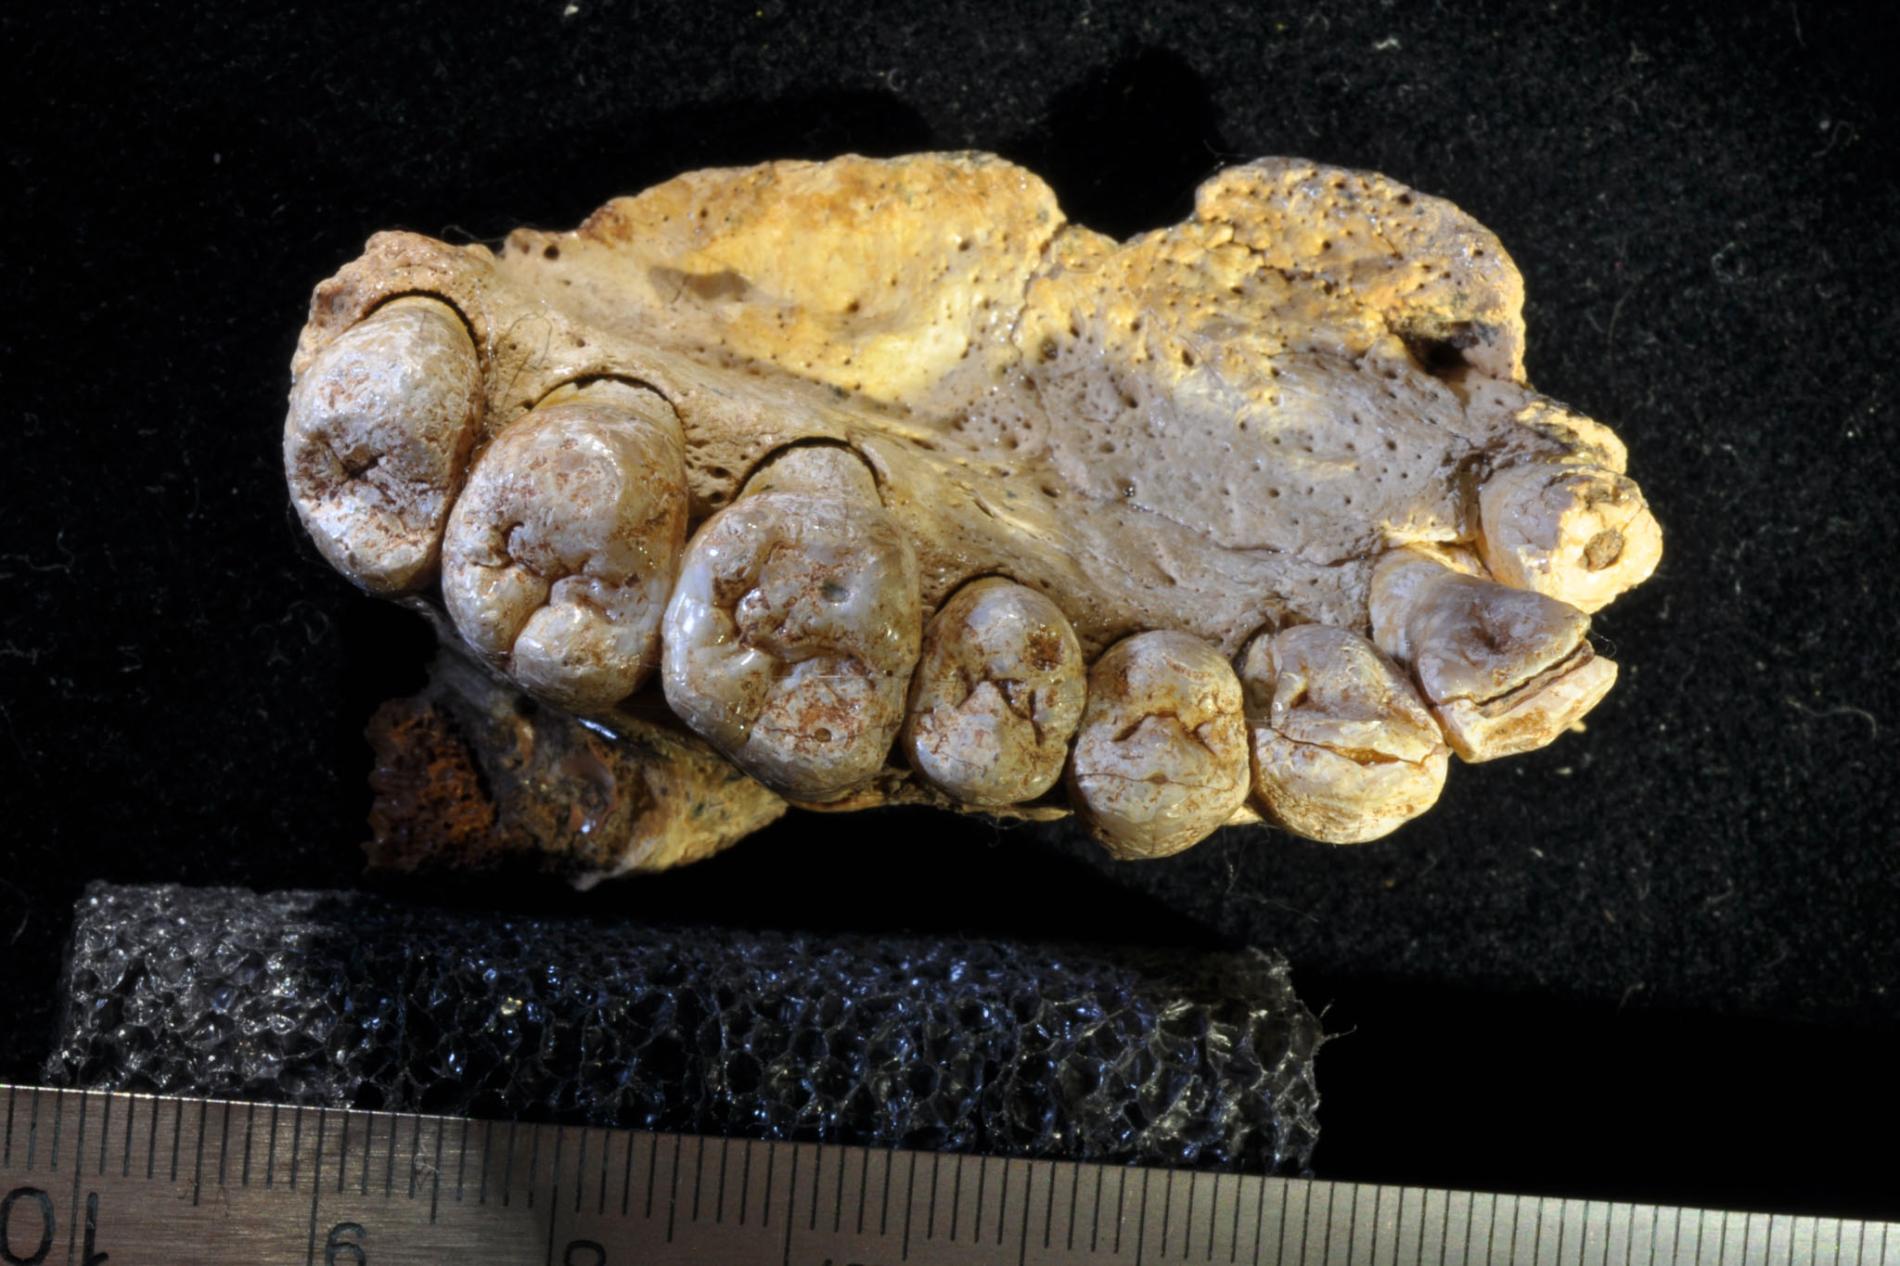  A fossilized human jawbone with teeth, discovered in 2016 in a cave in southern China, is providing new insights into the evolution of hepatitis B virus (HBV).